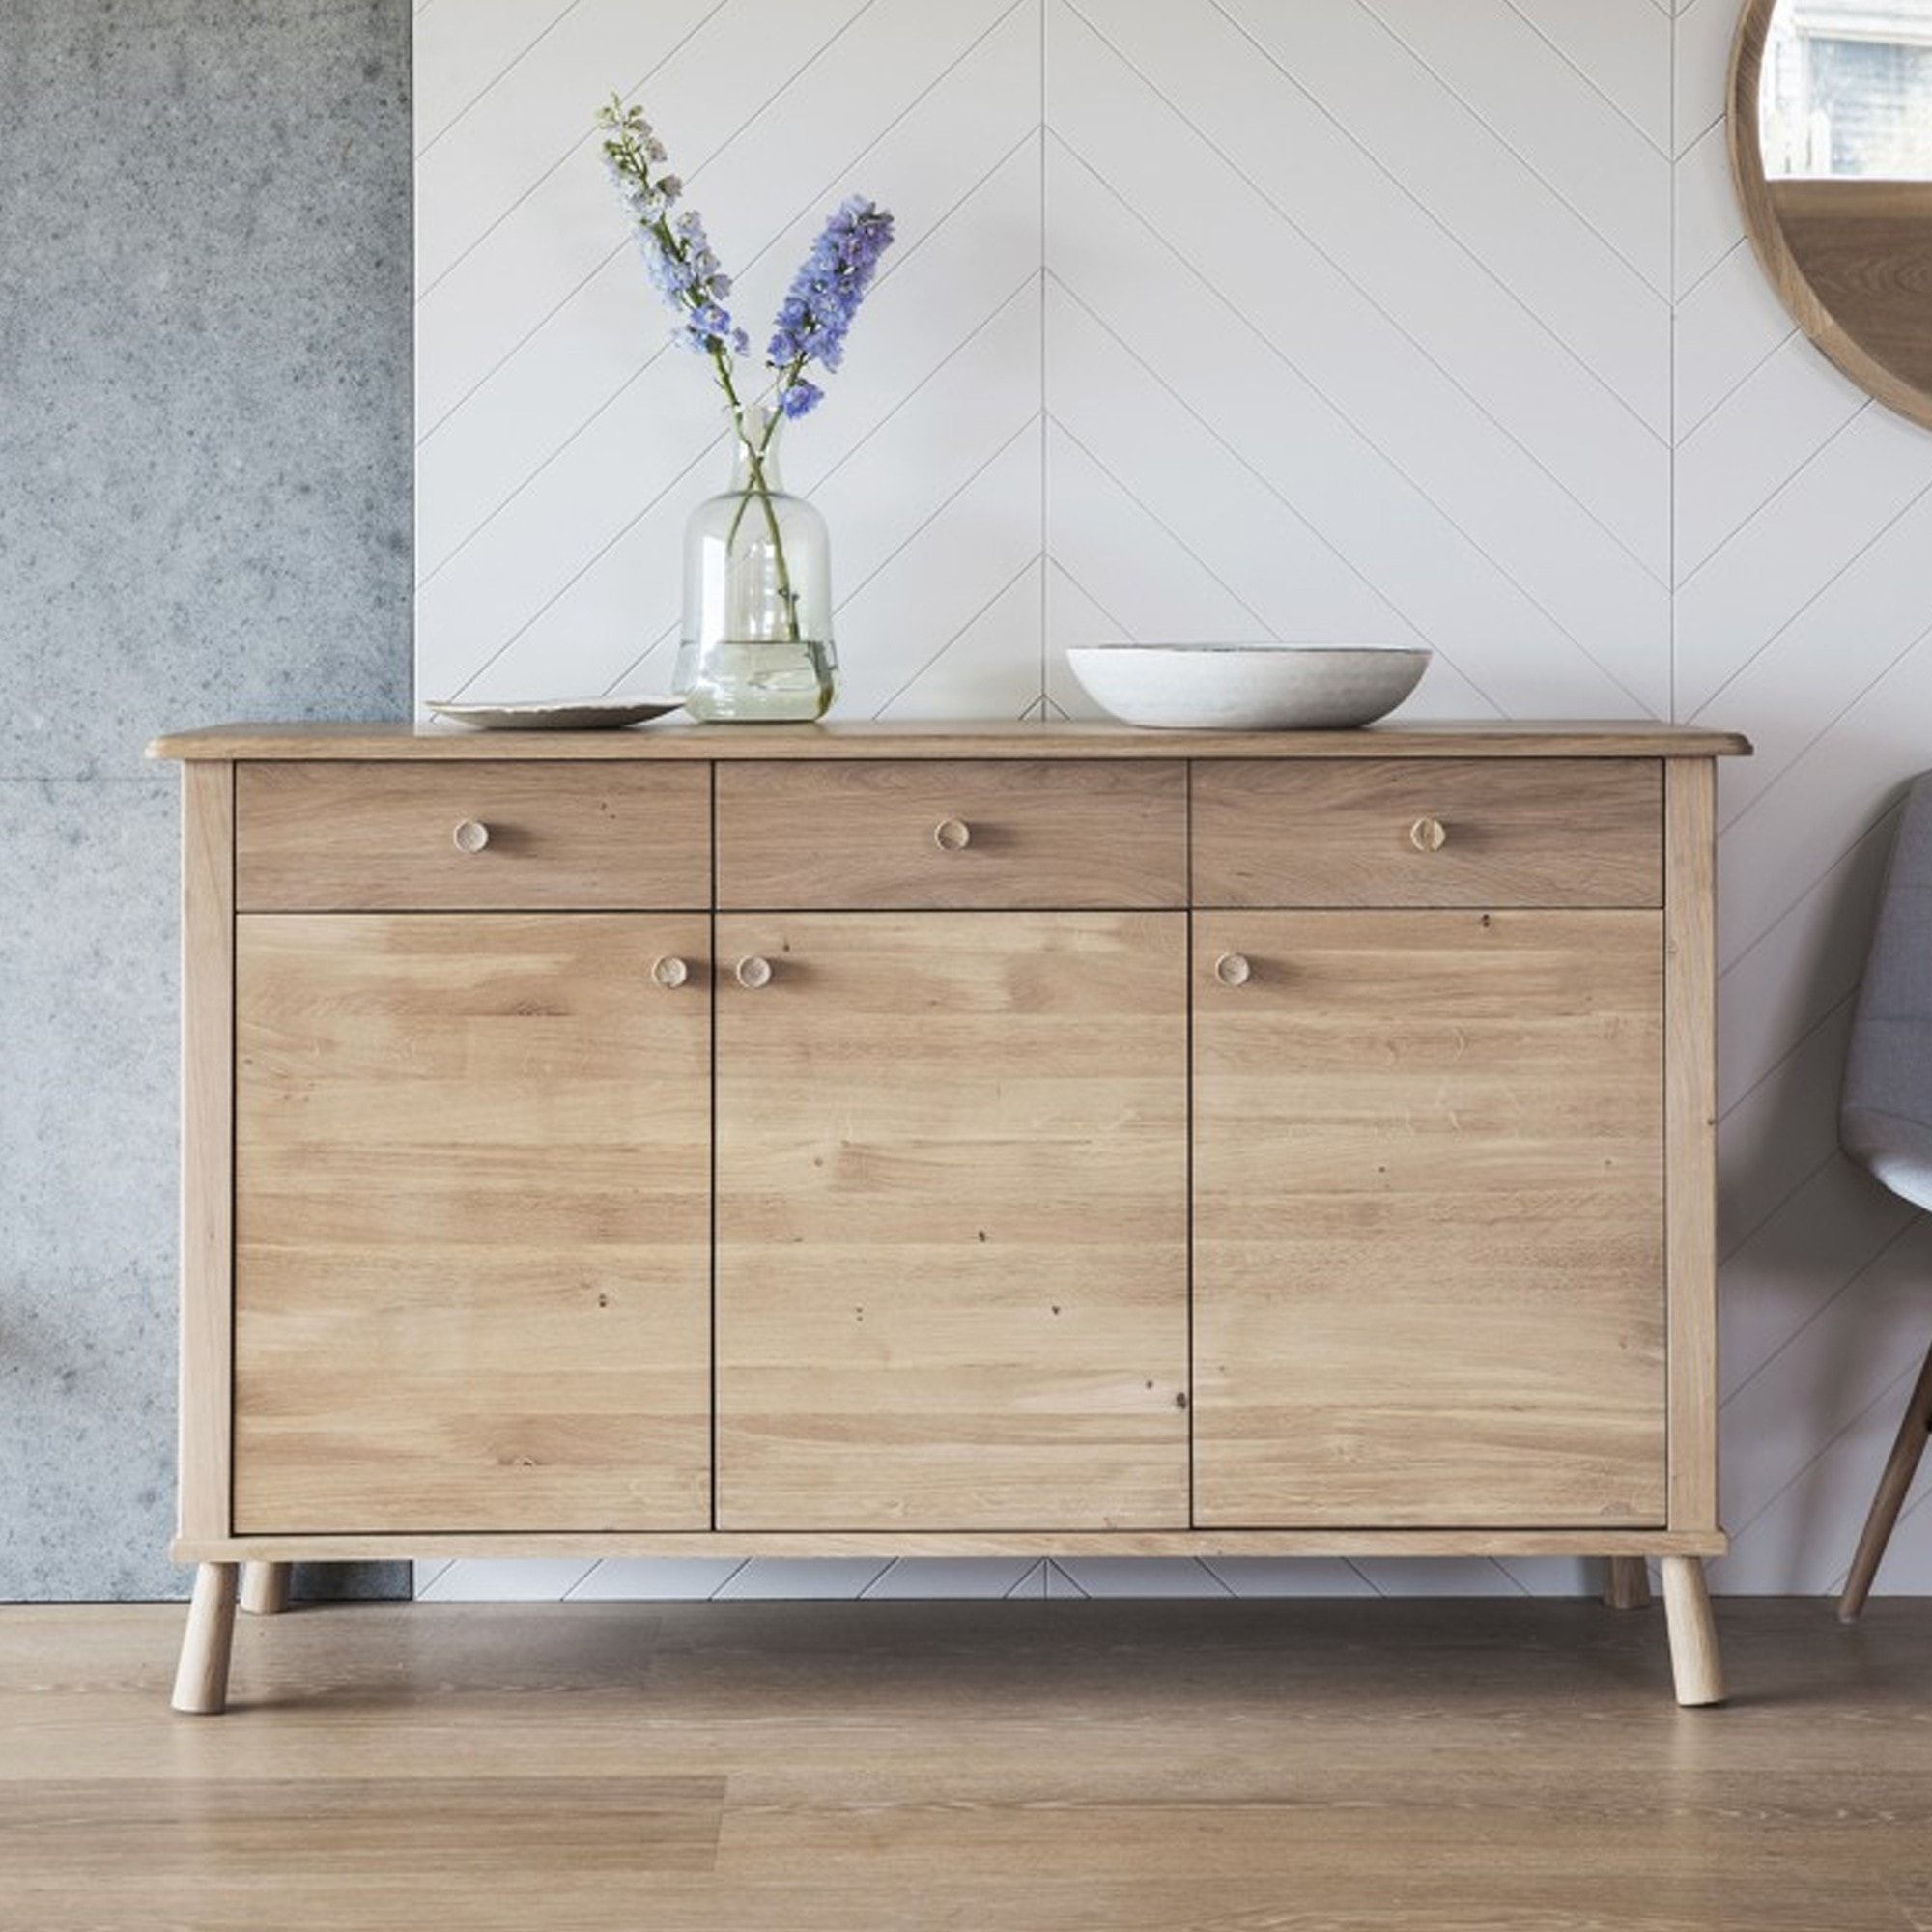 Wycombe 3 Door 3 Drawer Sideboard | Wooden Sideboards With Storage Intended For Best And Newest Sideboards With 3 Doors (View 11 of 15)